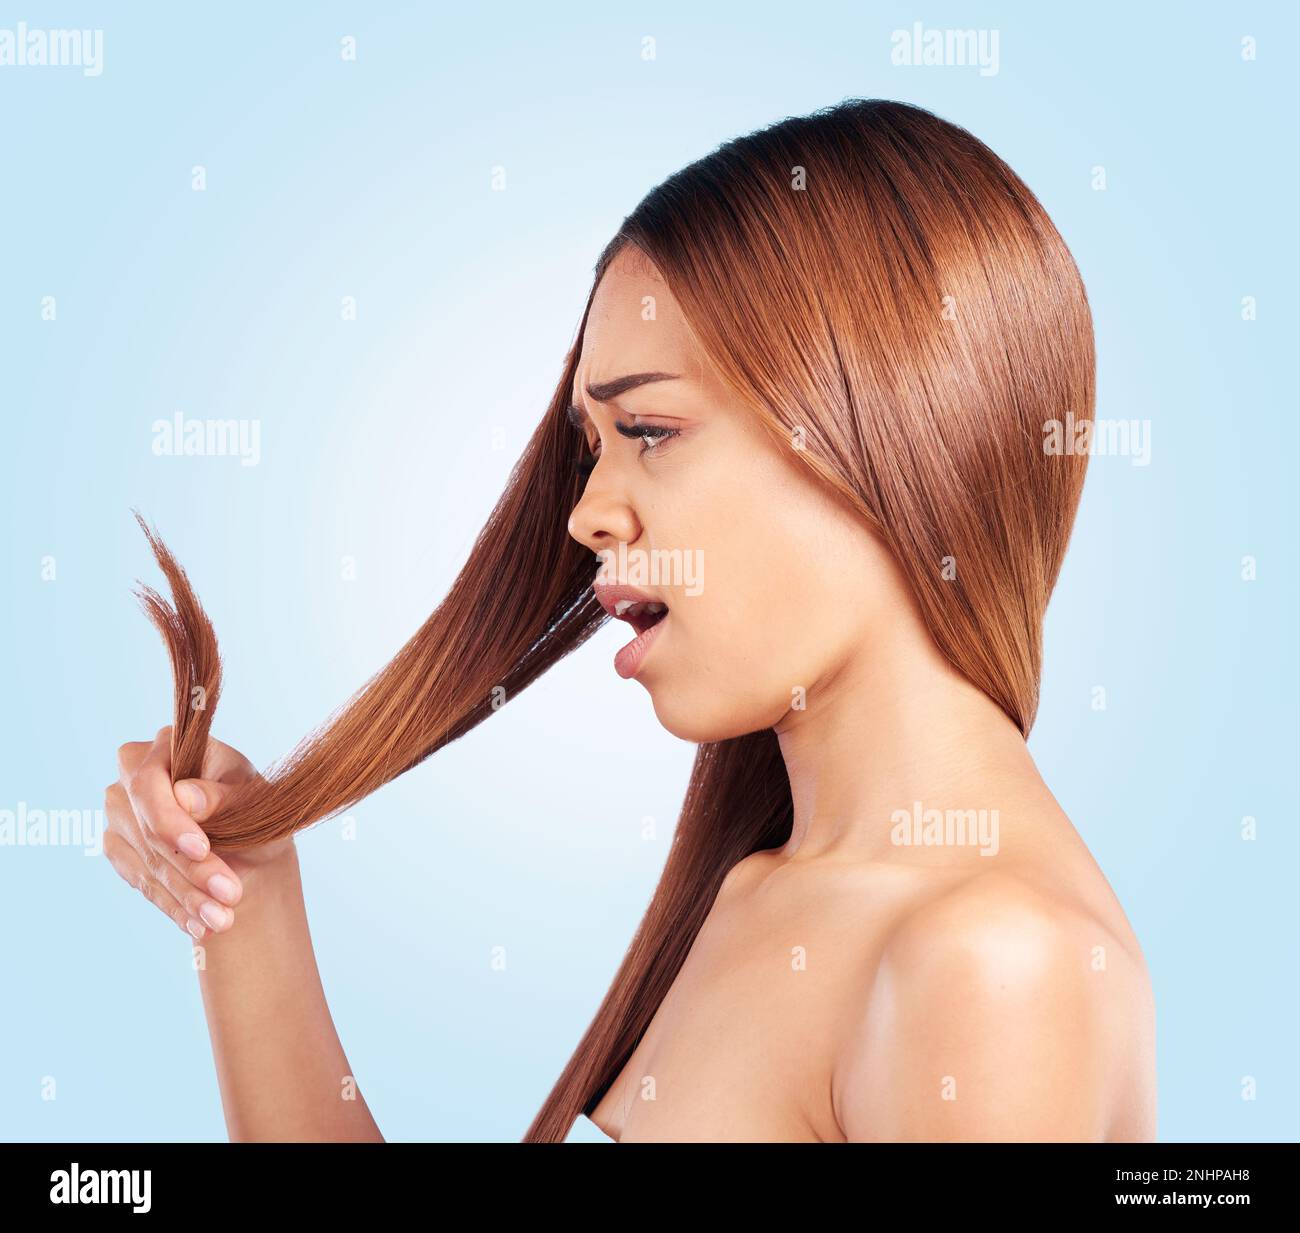 Hair, problem and woman with hair loss in studio for beauty, grooming and haircut on blue background. Damaged, haircare and girl model worried Stock Photo